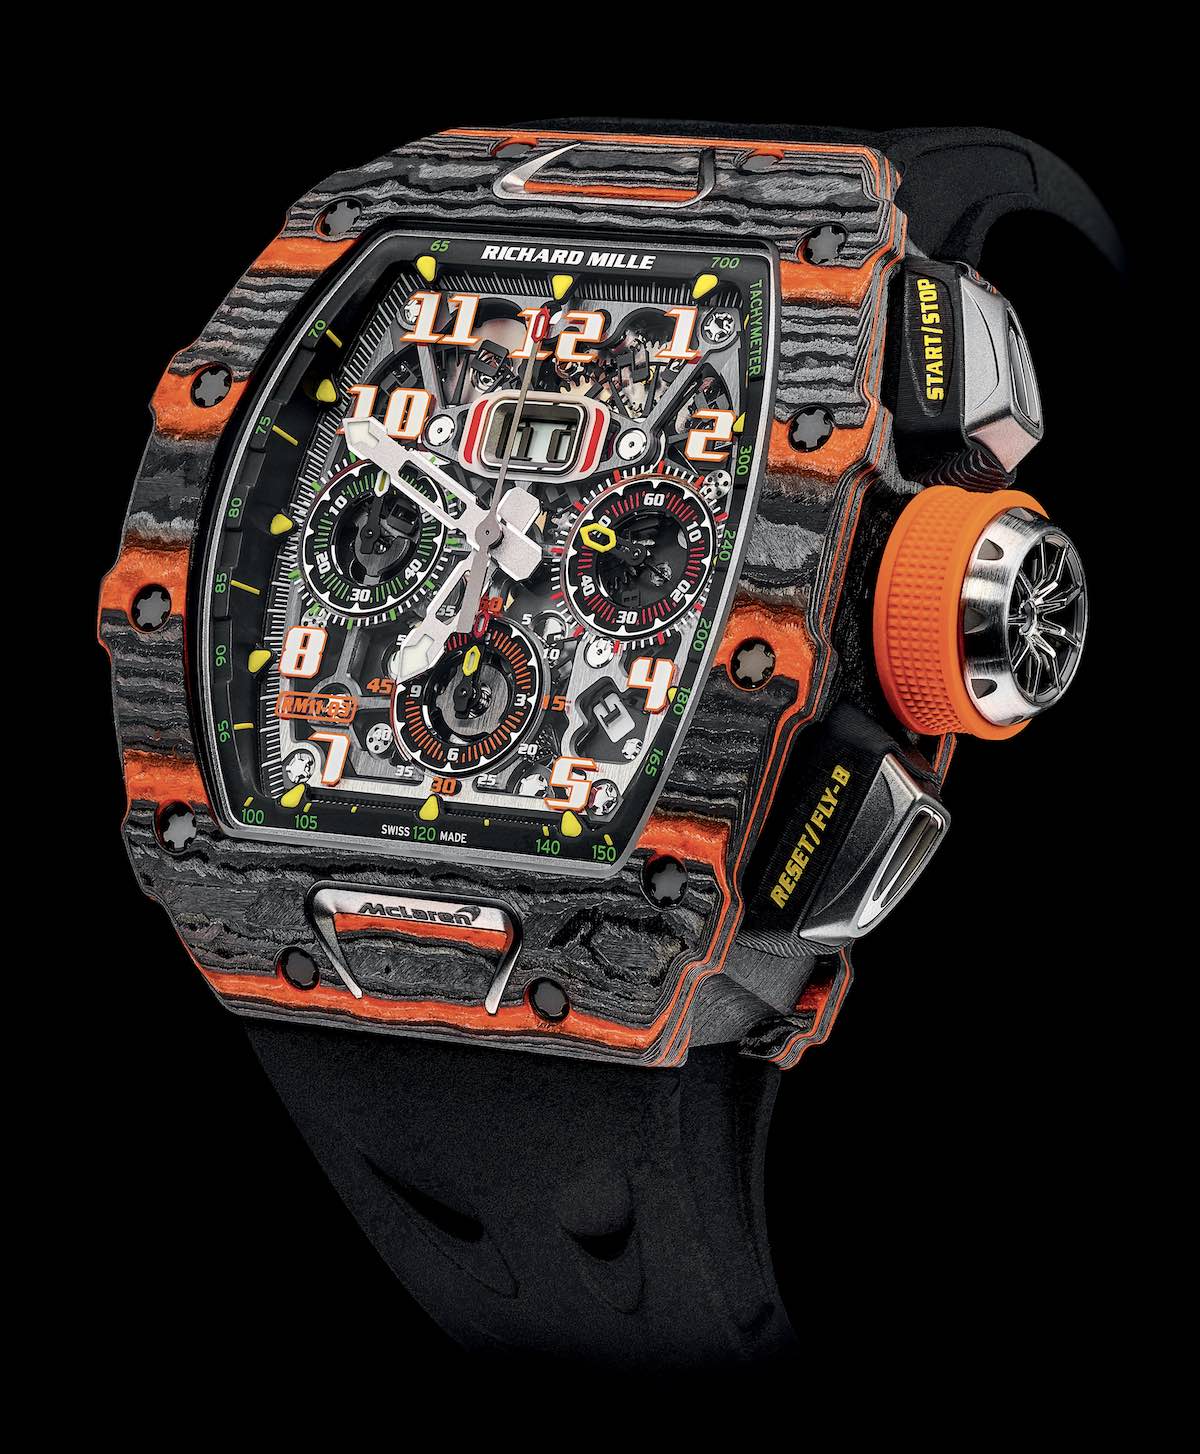 Richard Mille RM 11-03 Automatic Flyback Chronograph McLaren Only-Watch-2019